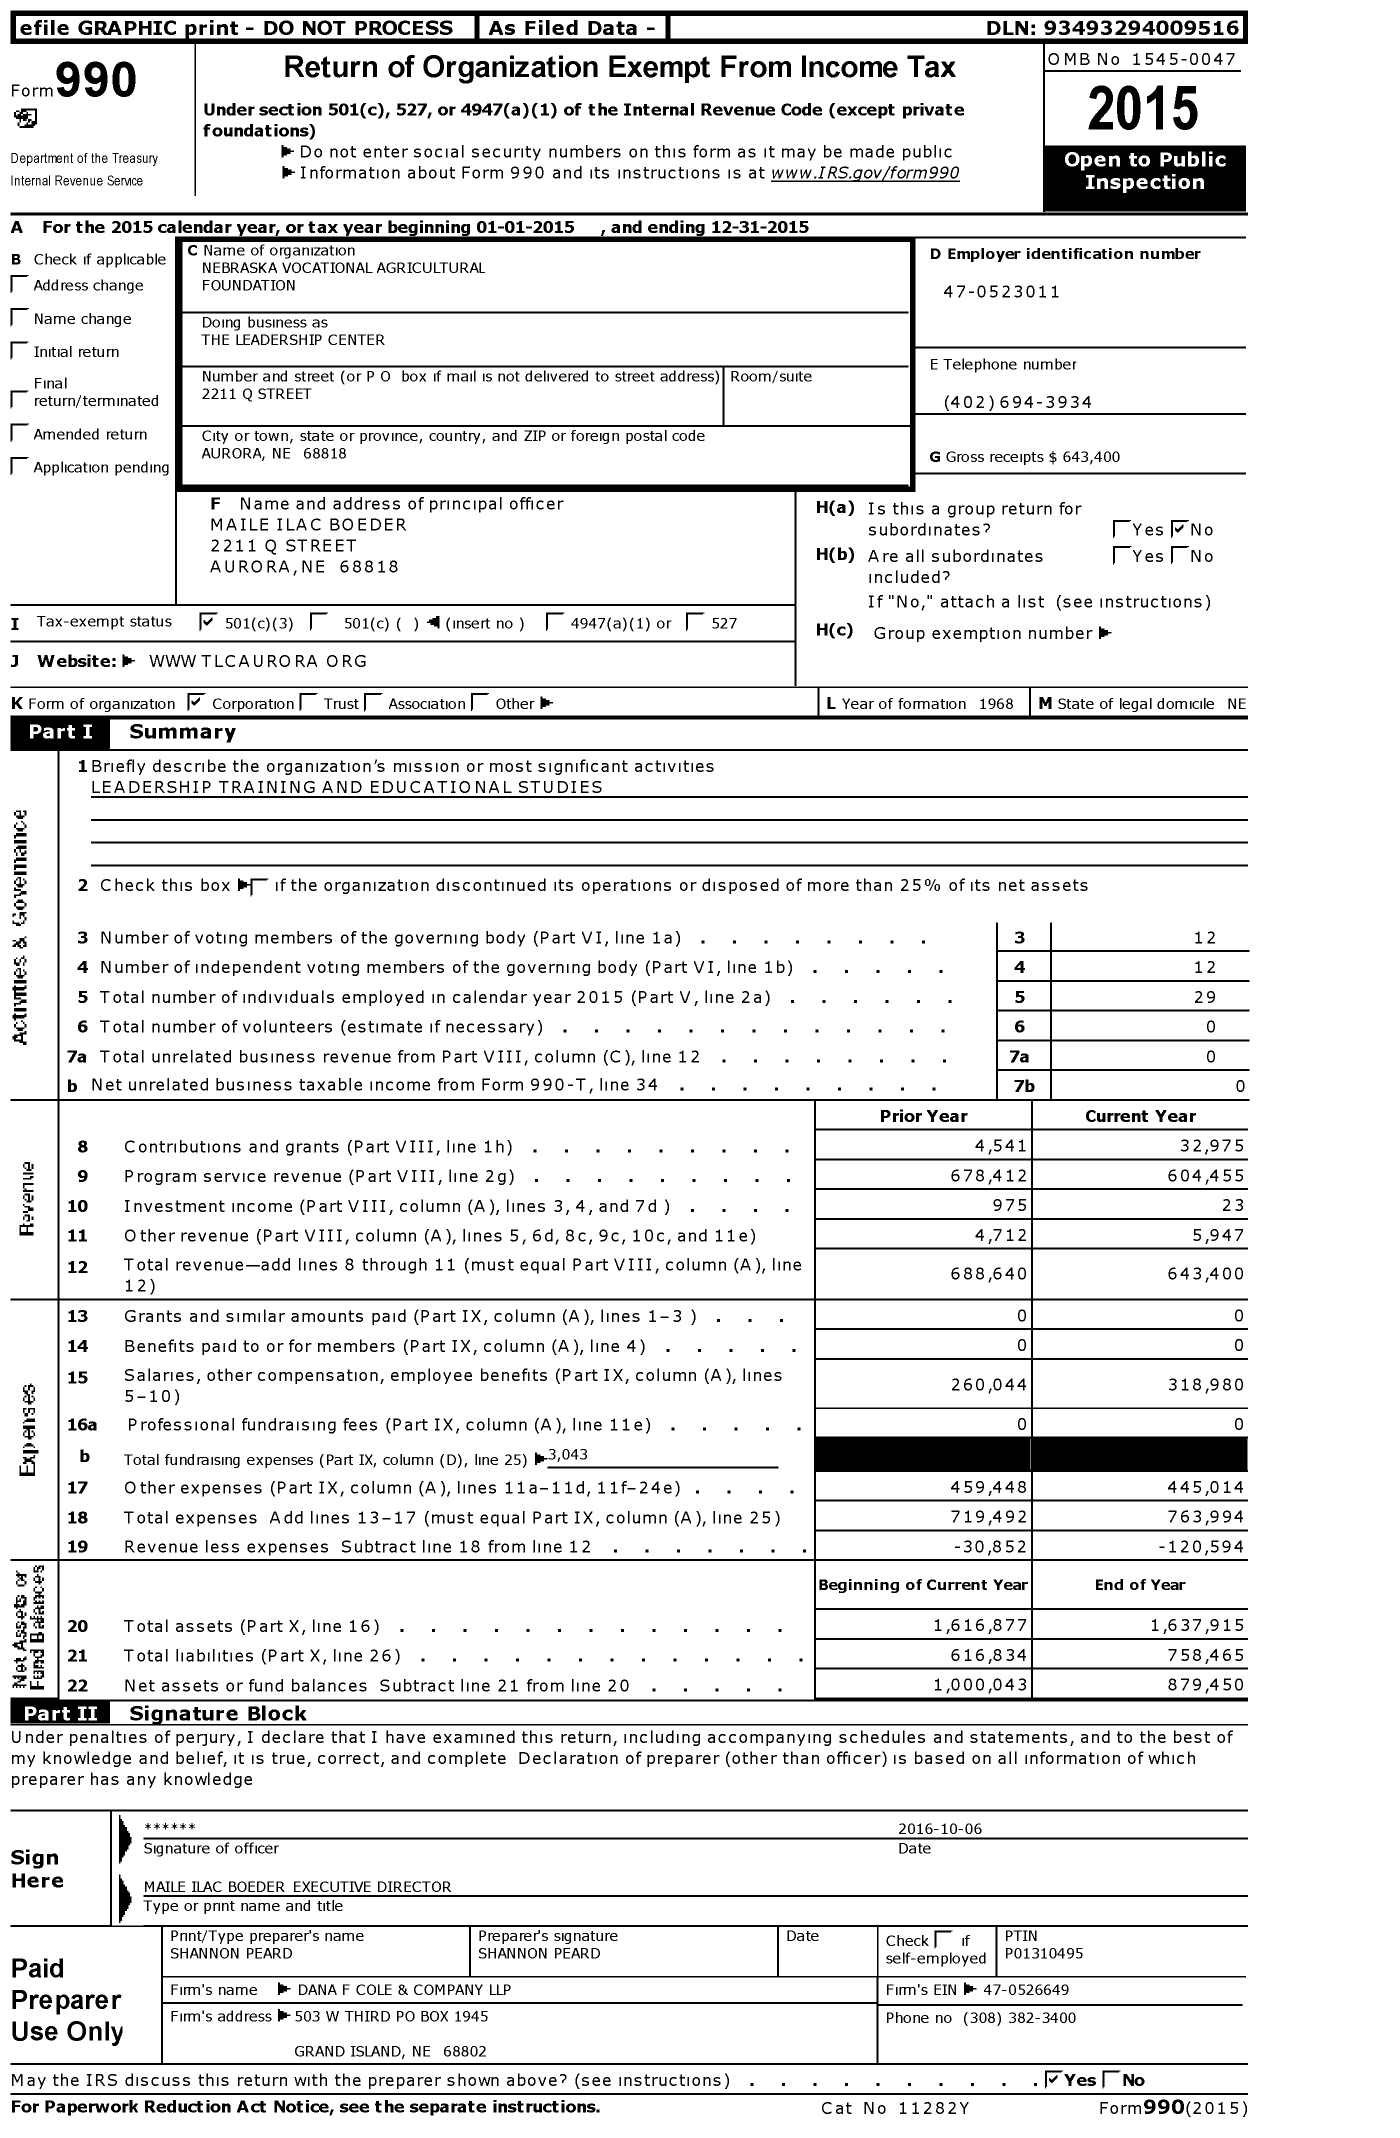 Image of first page of 2015 Form 990 for The Leadership Center / Nebraska Vocational Agricultural Foundation